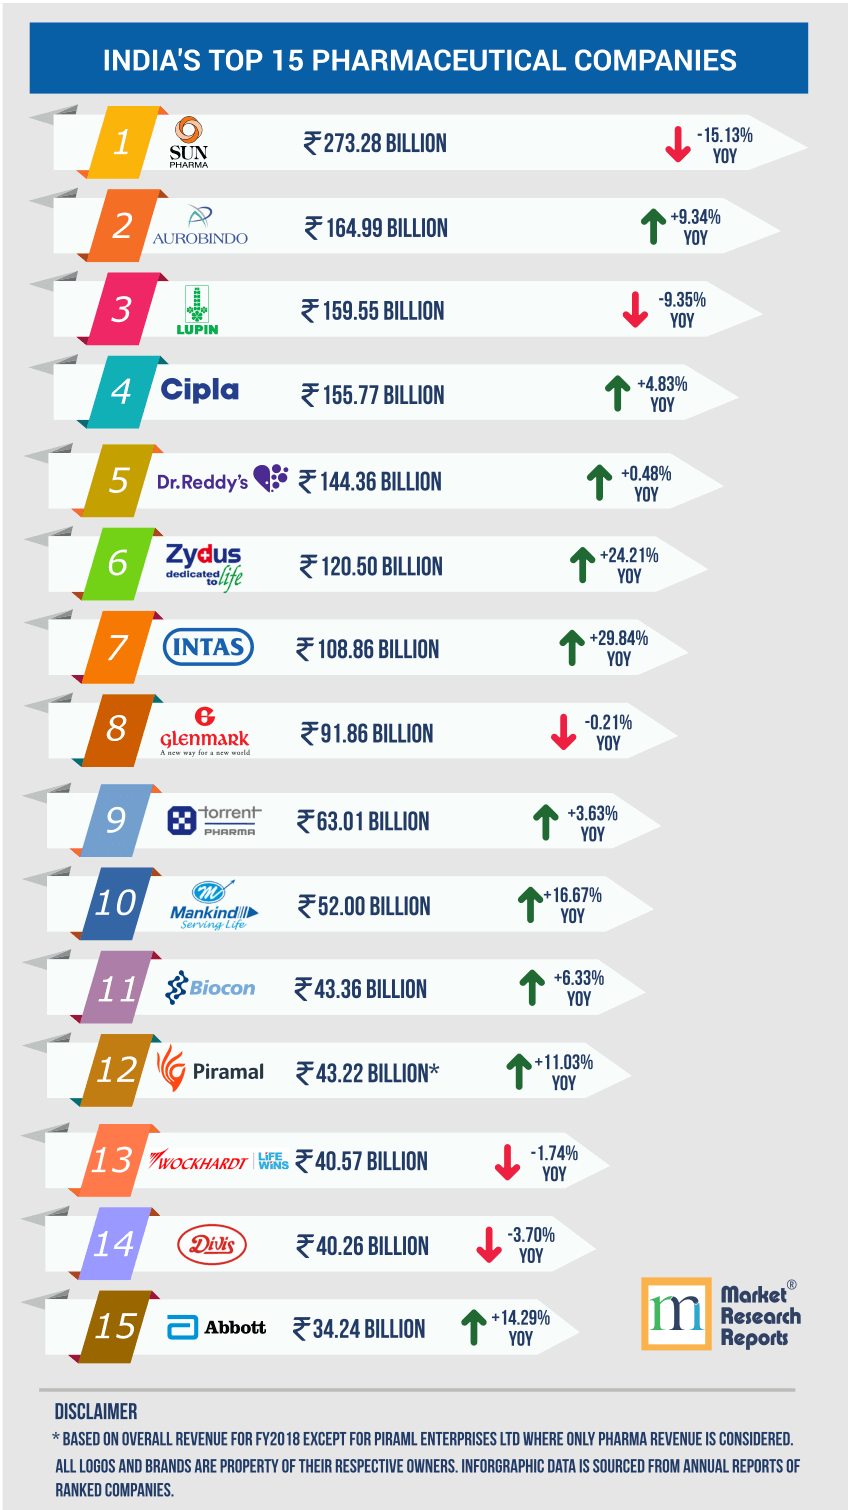 The Top 15 Pharmaceutical Companies in India